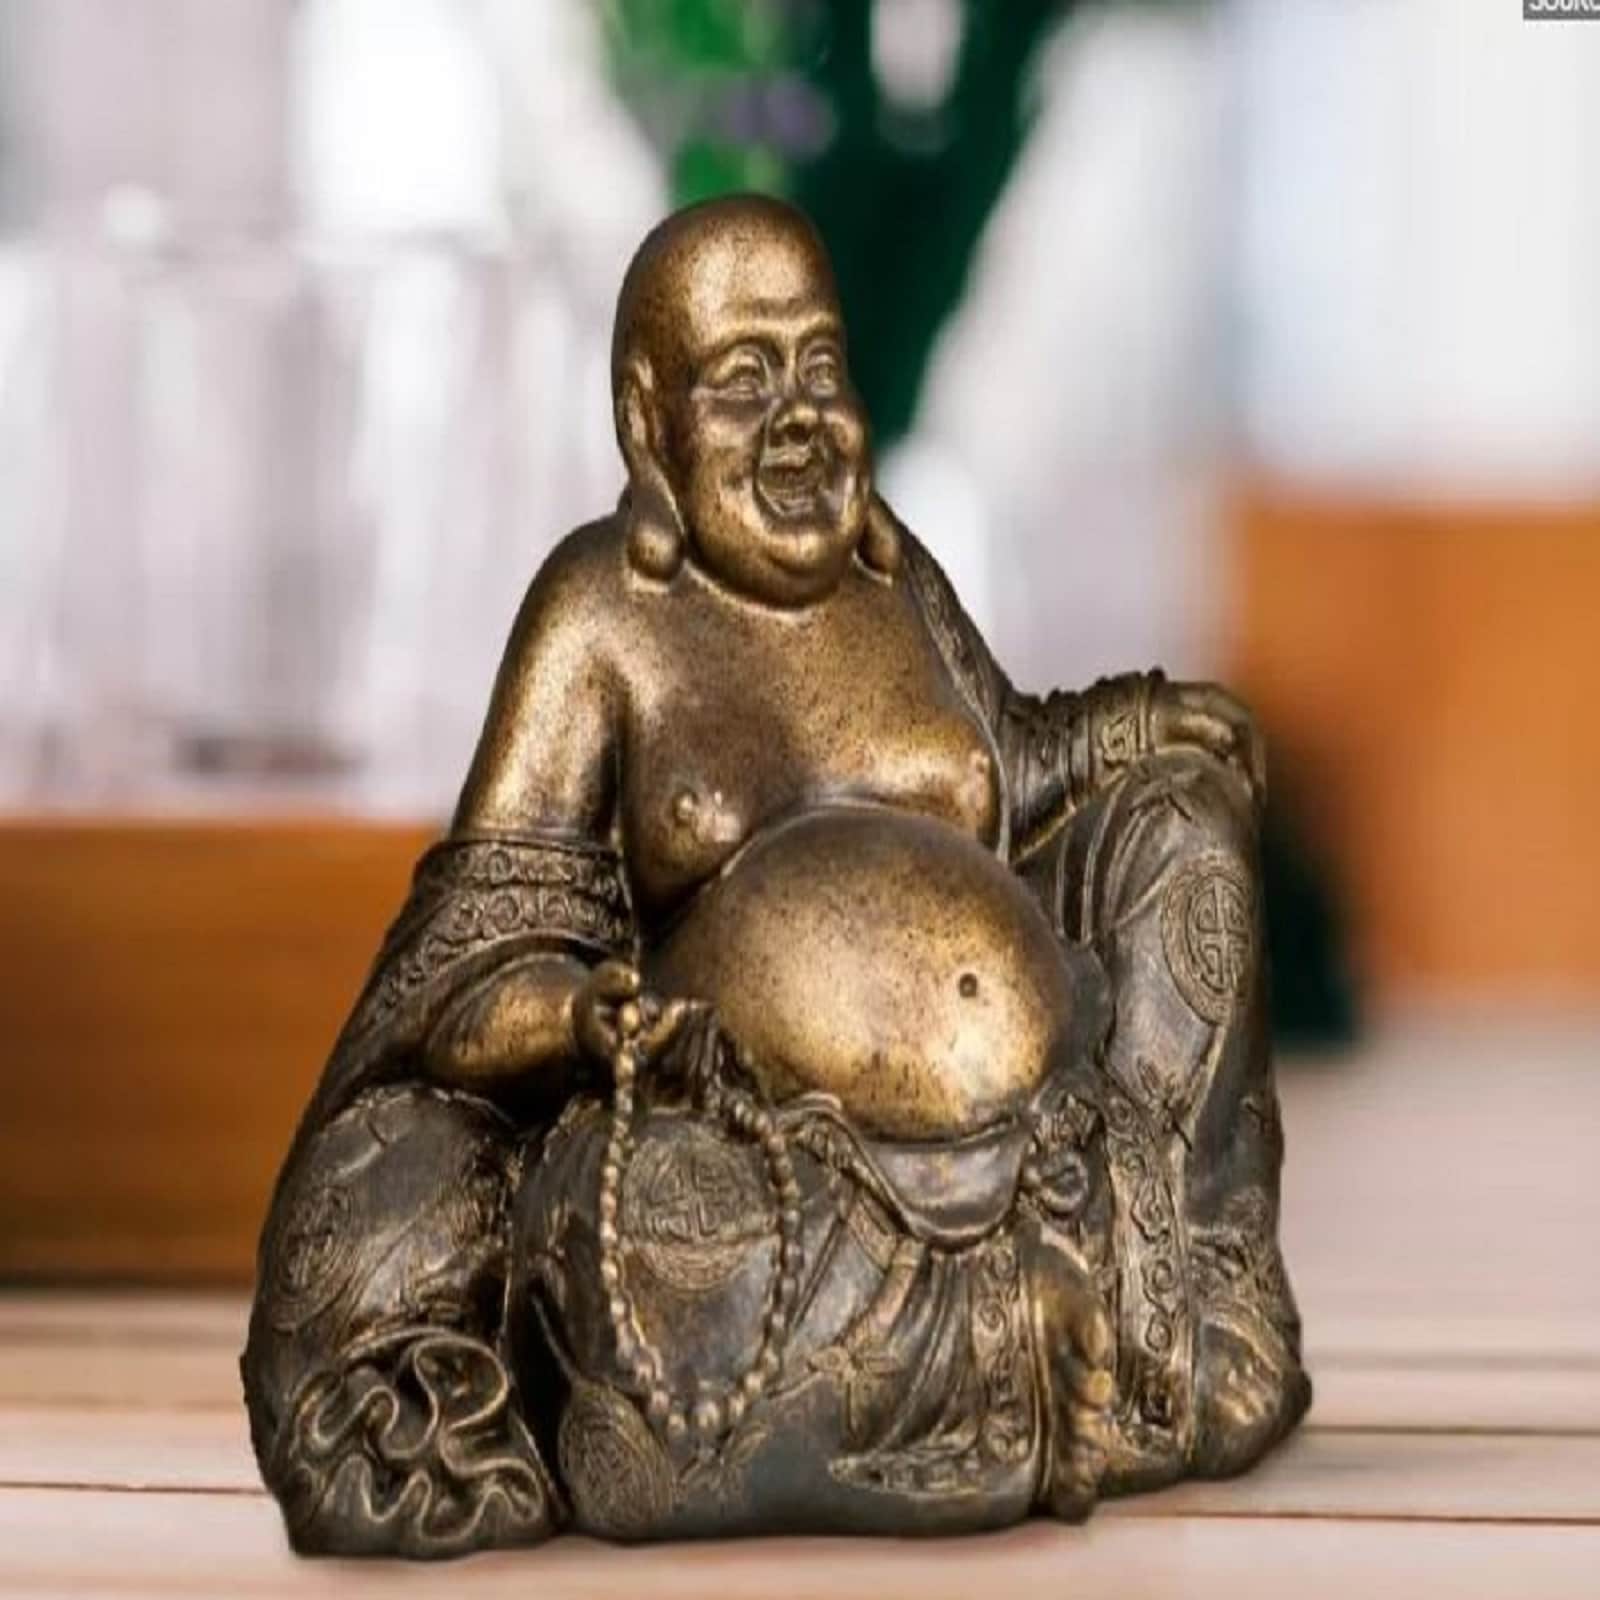 Happy Buddha Statues for Good Luck and Fortune – Buddha Groove